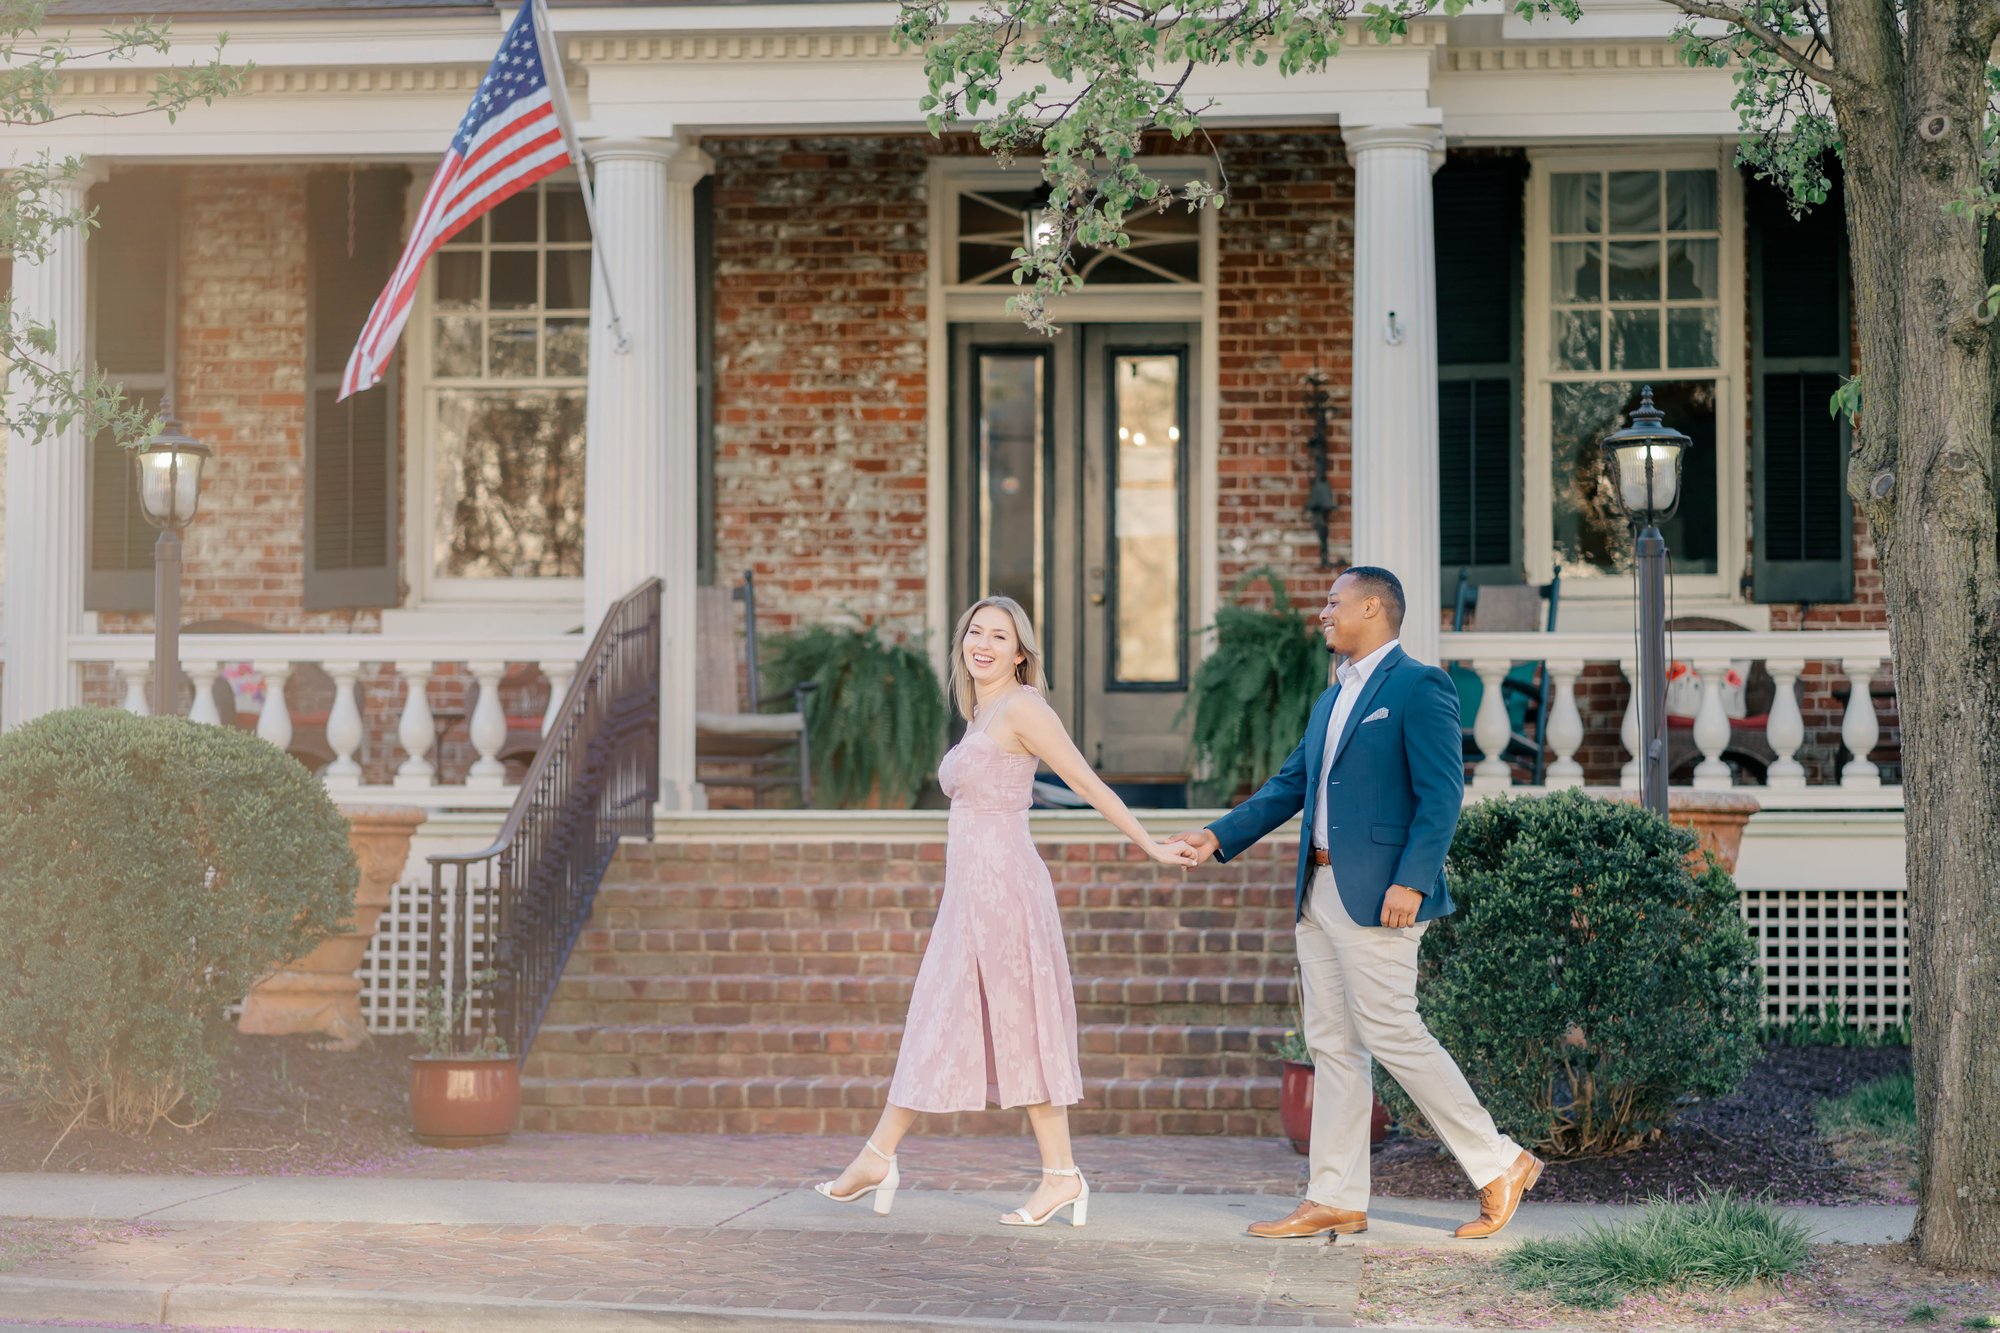 Engagement photo session image of an engaged couple in downtown Fredericksburg, Virginia captured by Stephanie Grooms Artistry